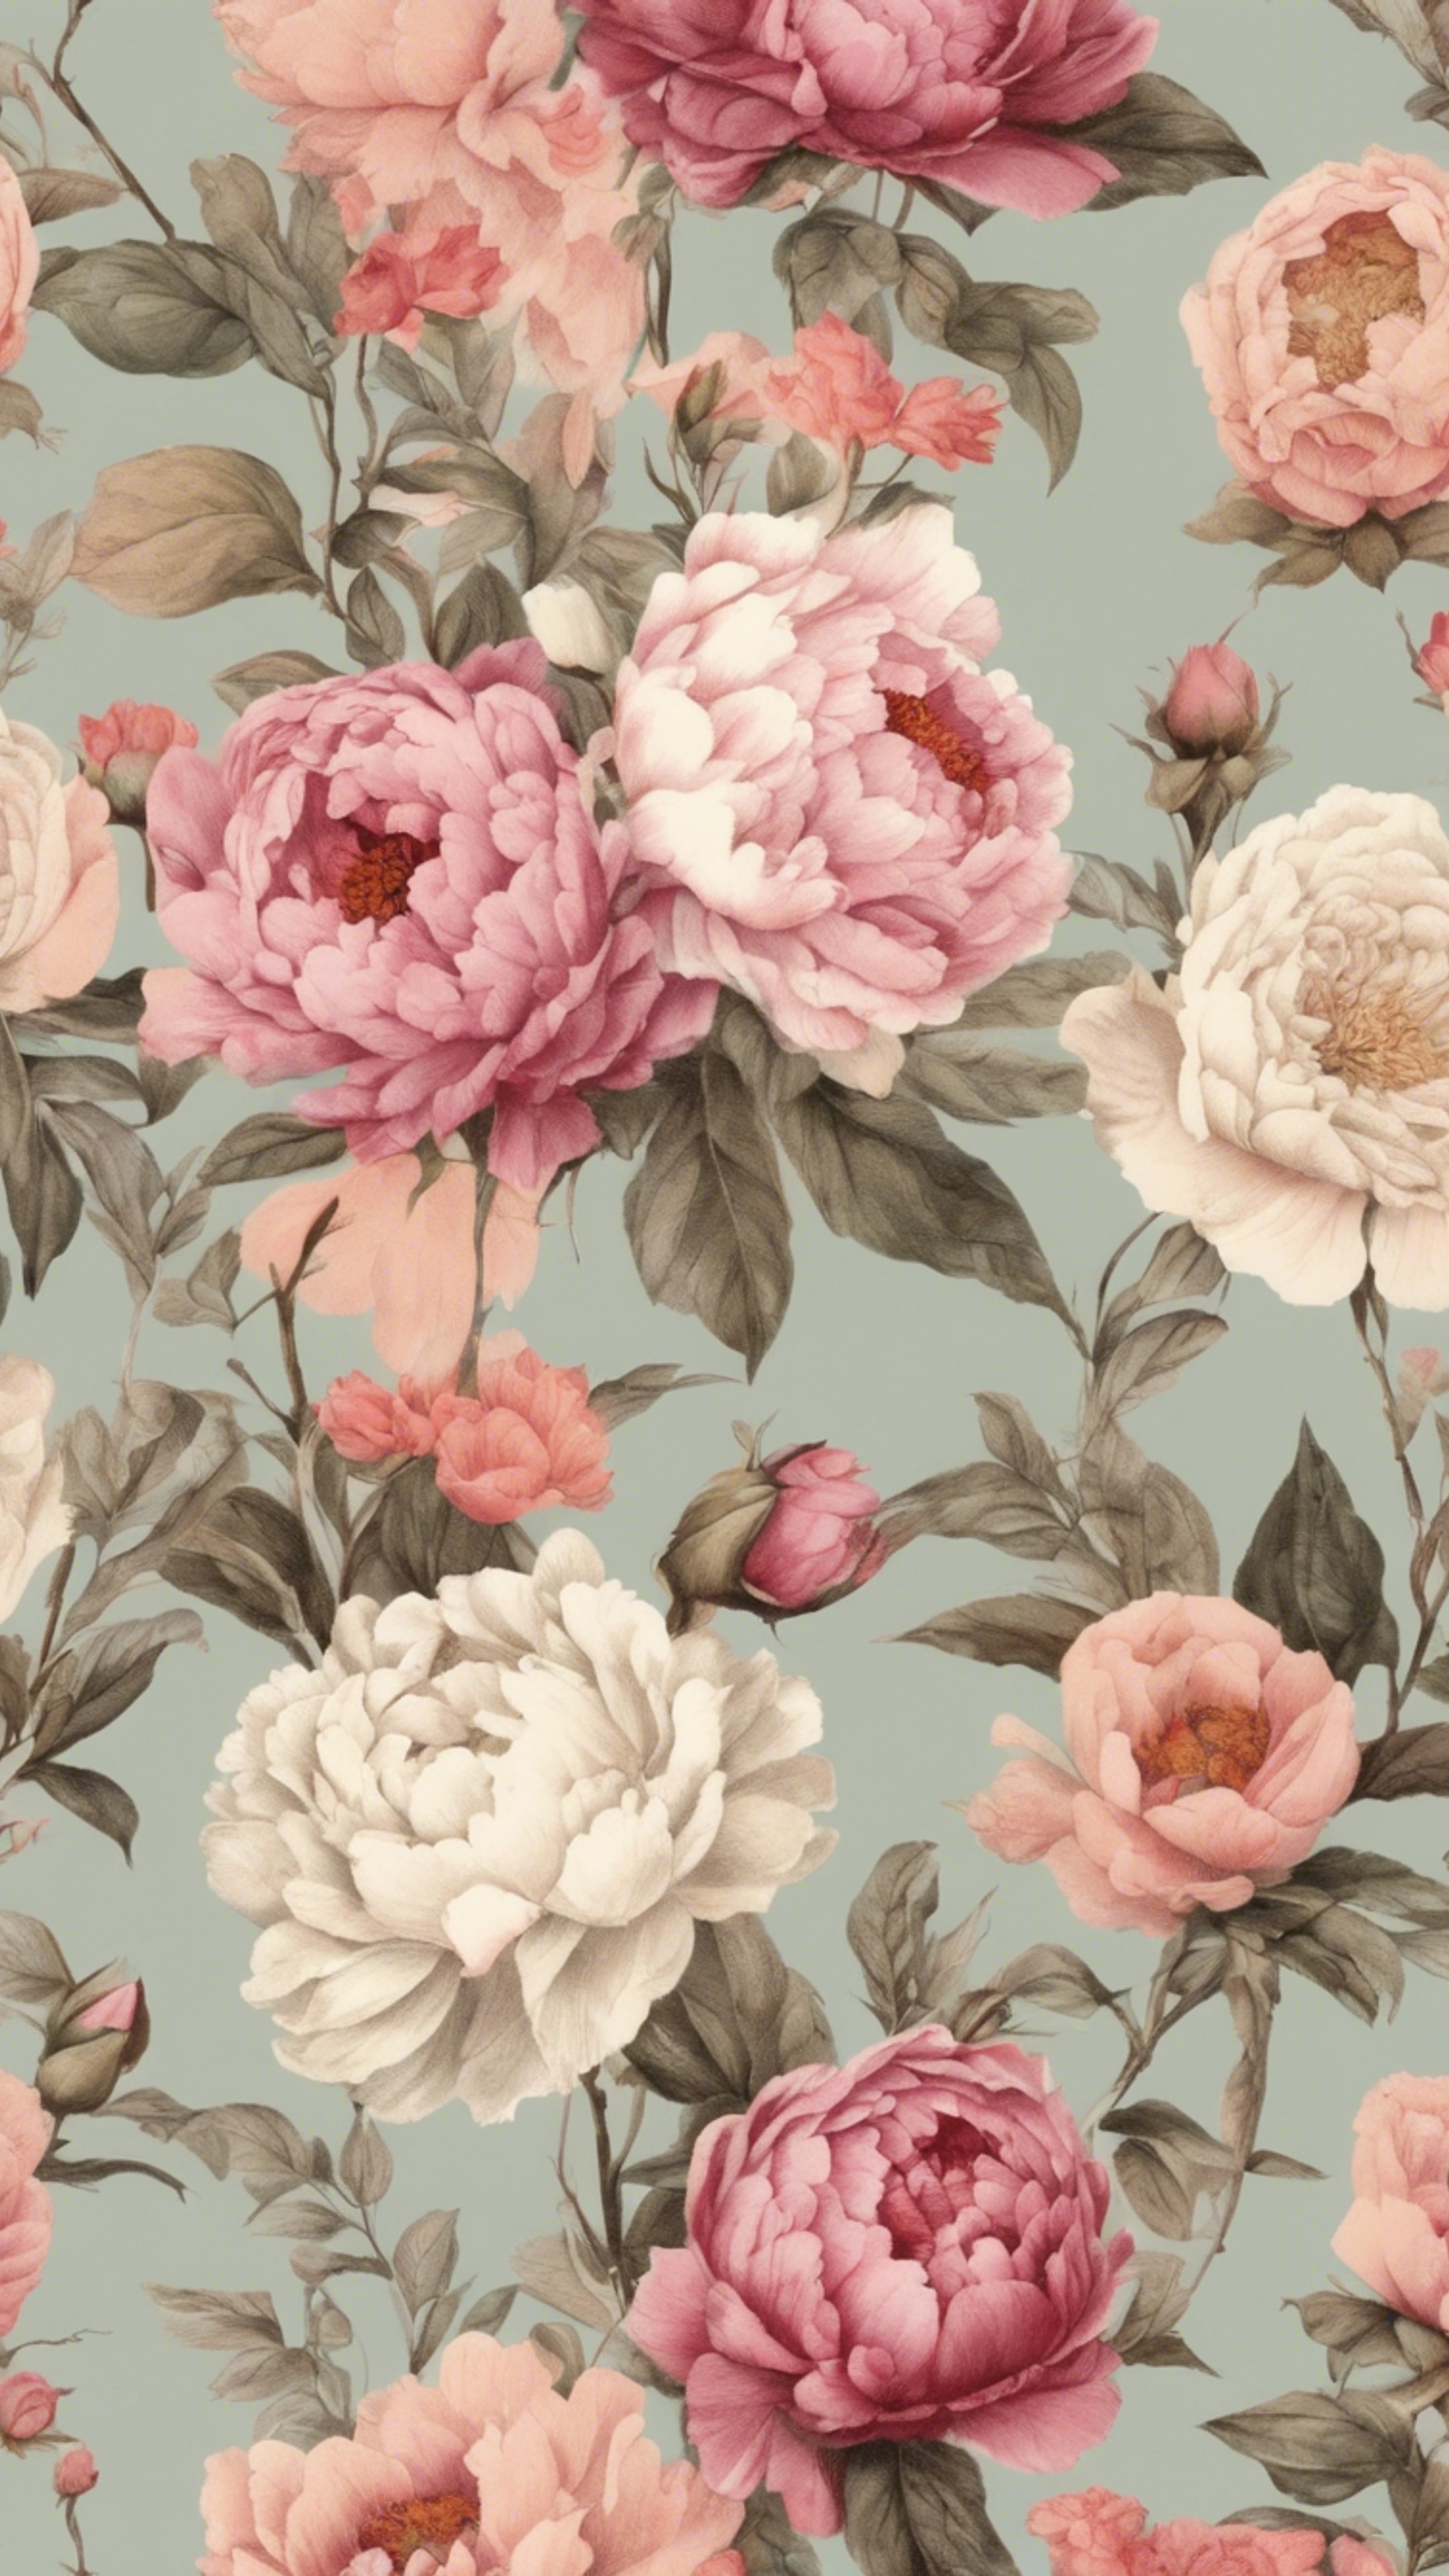 A vintage chintz floral pattern with roses and peonies on a soft pastel background.壁紙[912901ea59bd47e79de8]